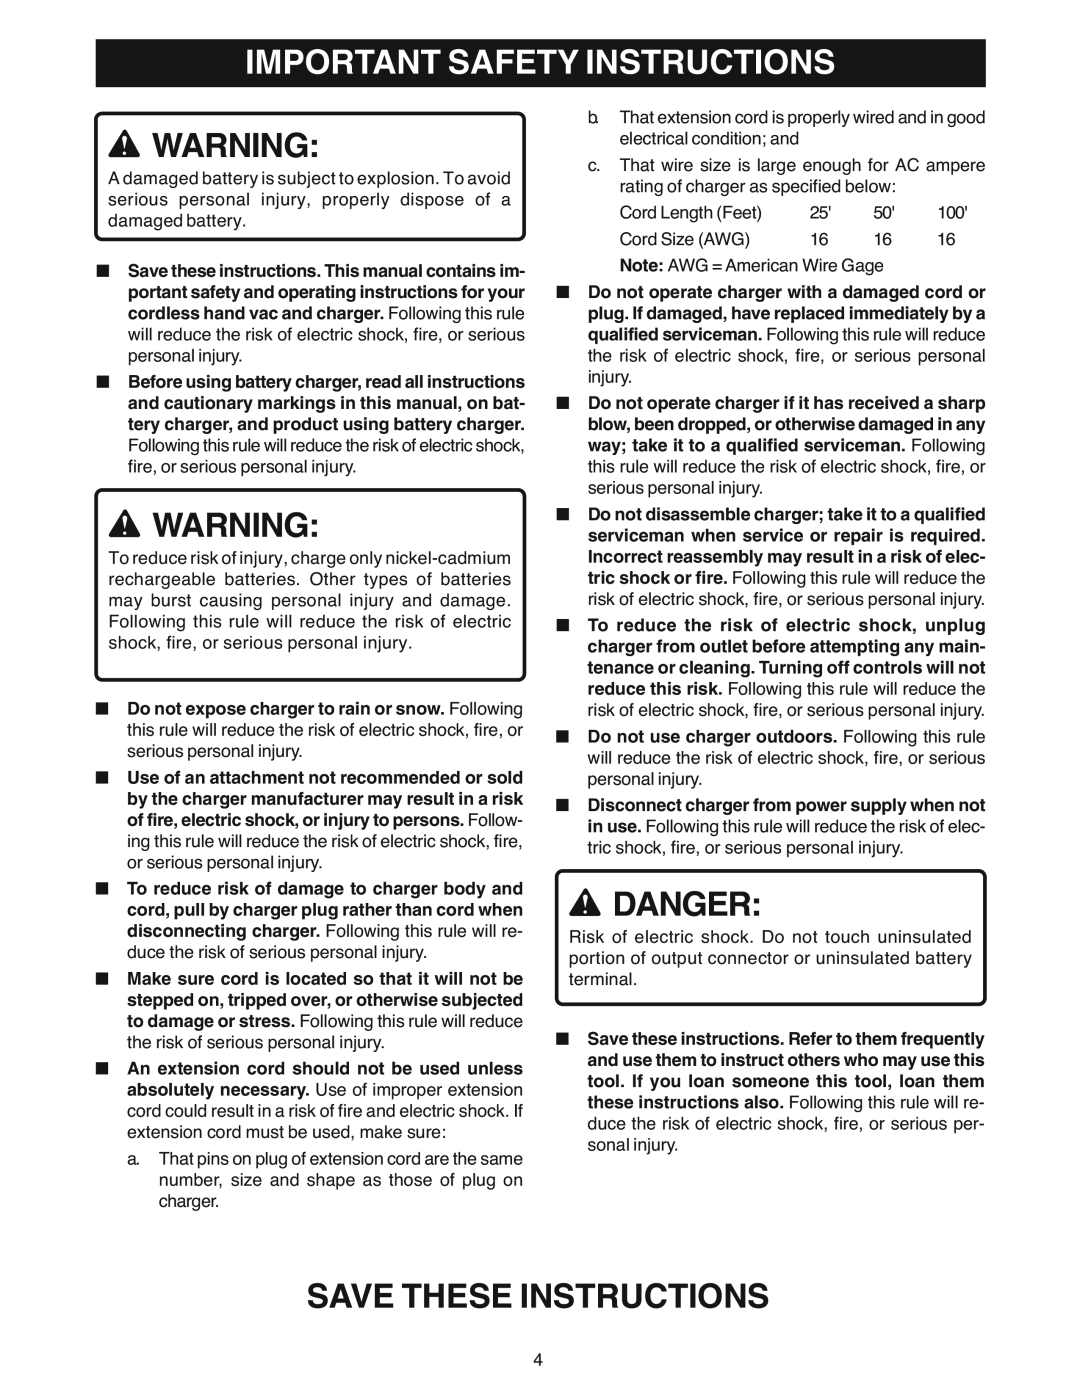 Ryobi VC180 manual Important Safety Instructions, Danger, Save These Instructions 